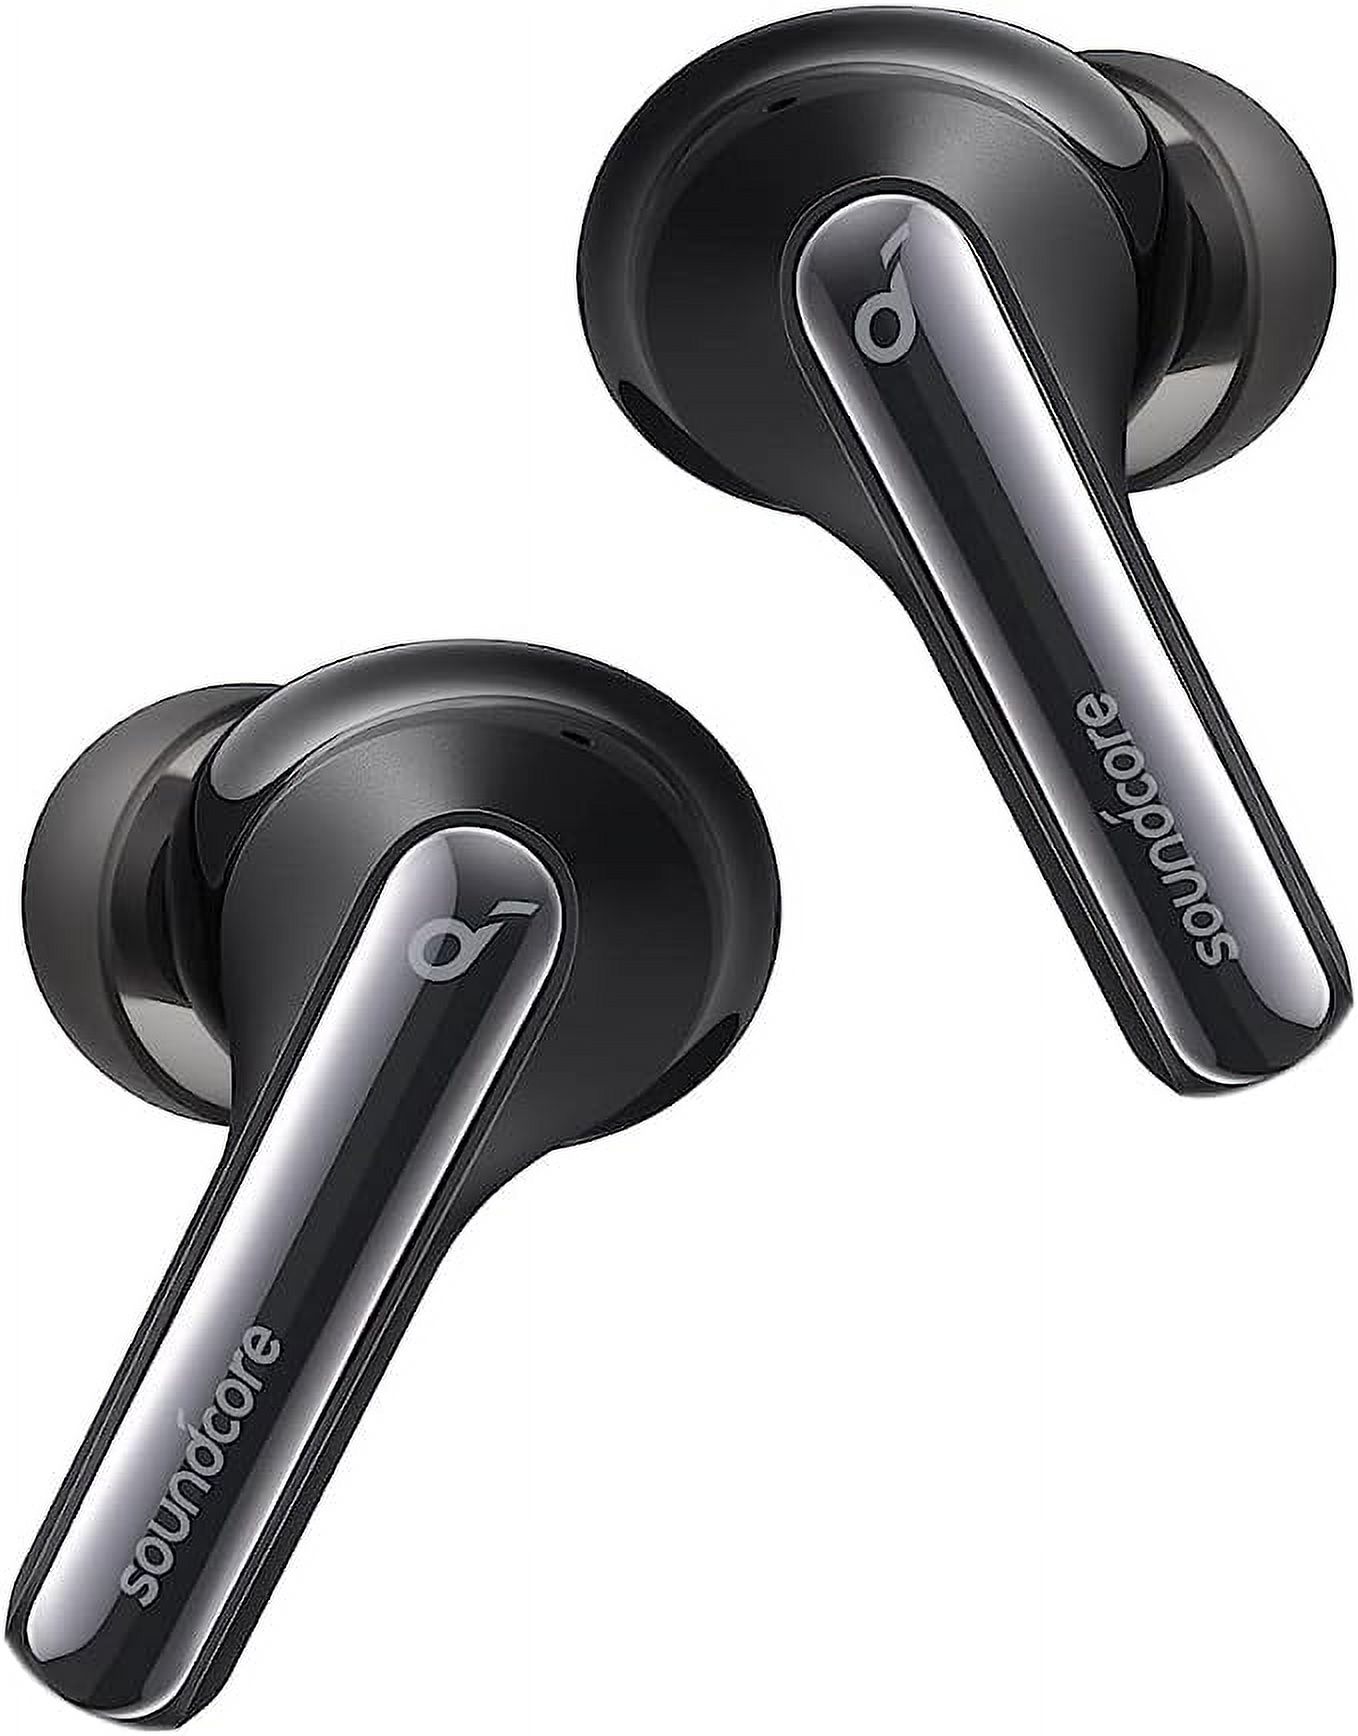 Soundcore Life P3i Hybrid Active Noise Cancelling Earbuds ,4 Mics, Custom EQ,6H Playtime,Black - image 1 of 7